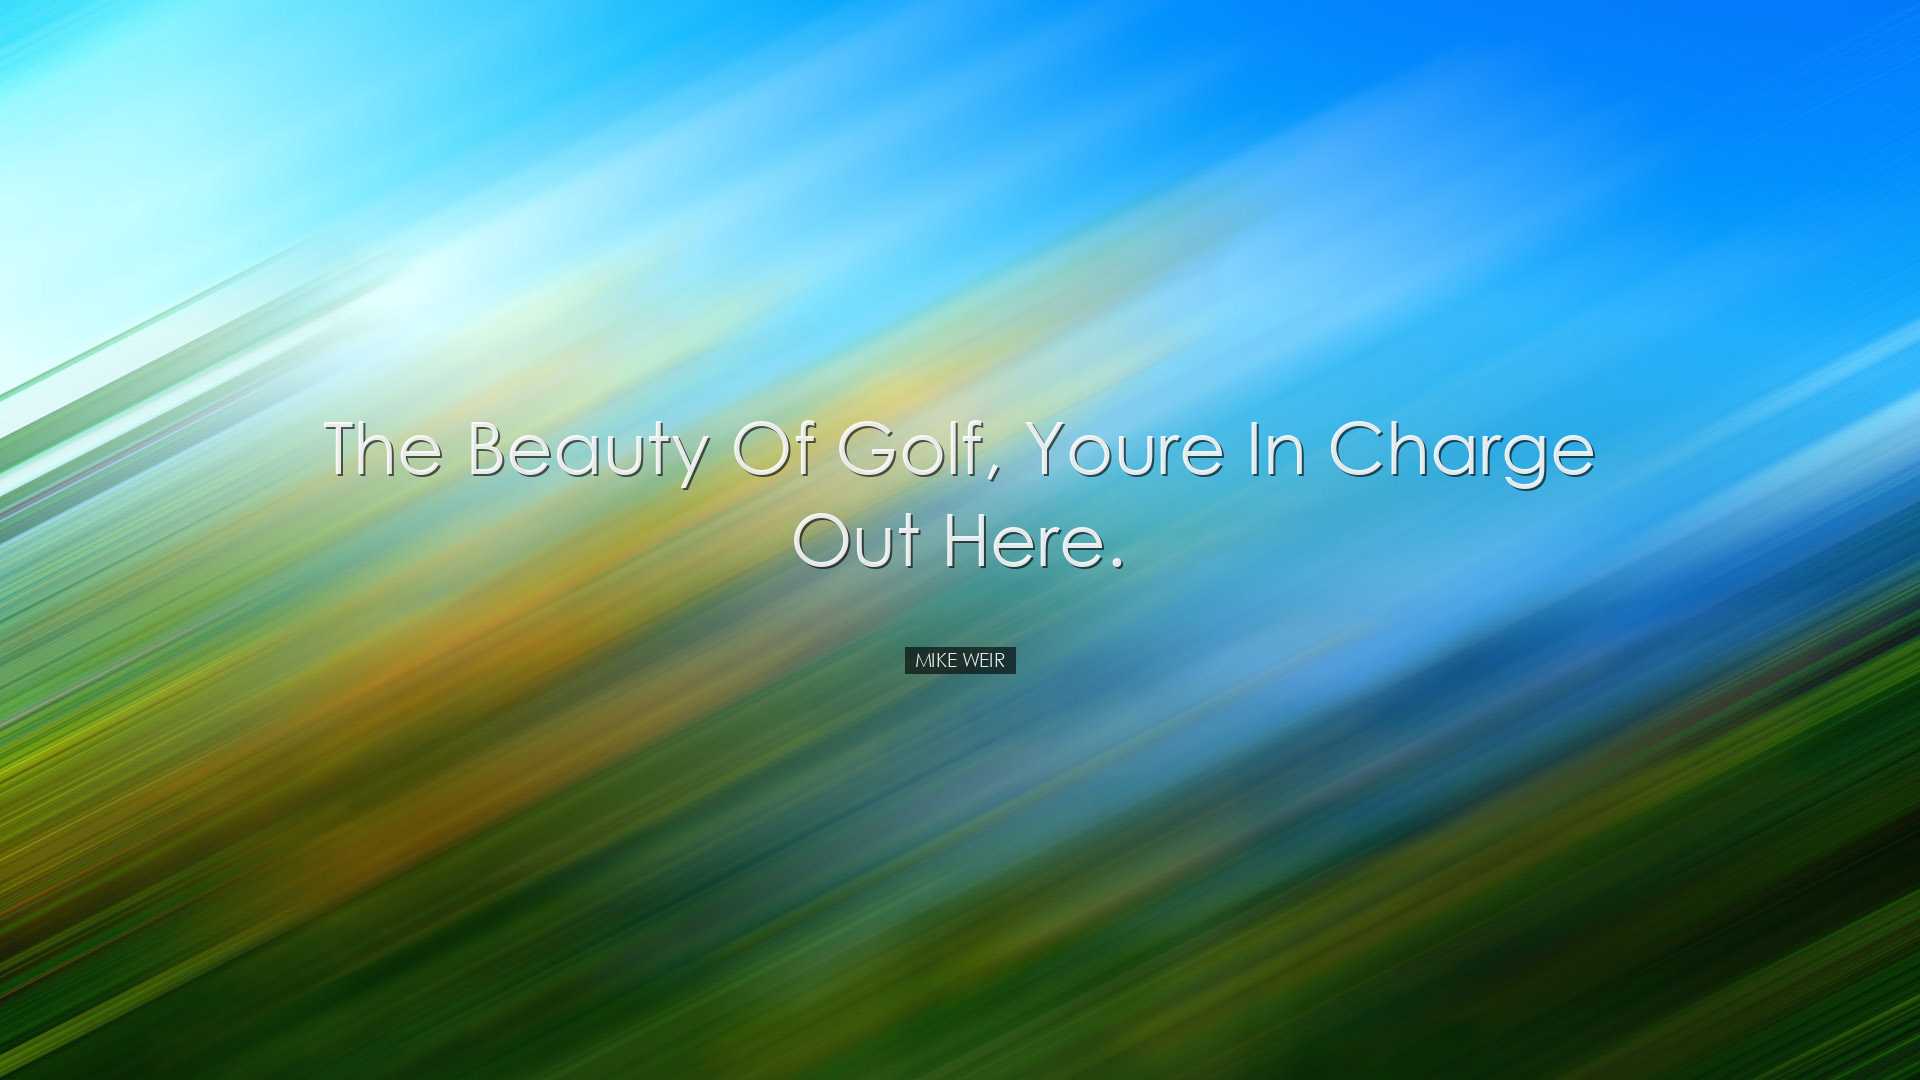 The beauty of golf, youre in charge out here. - Mike Weir